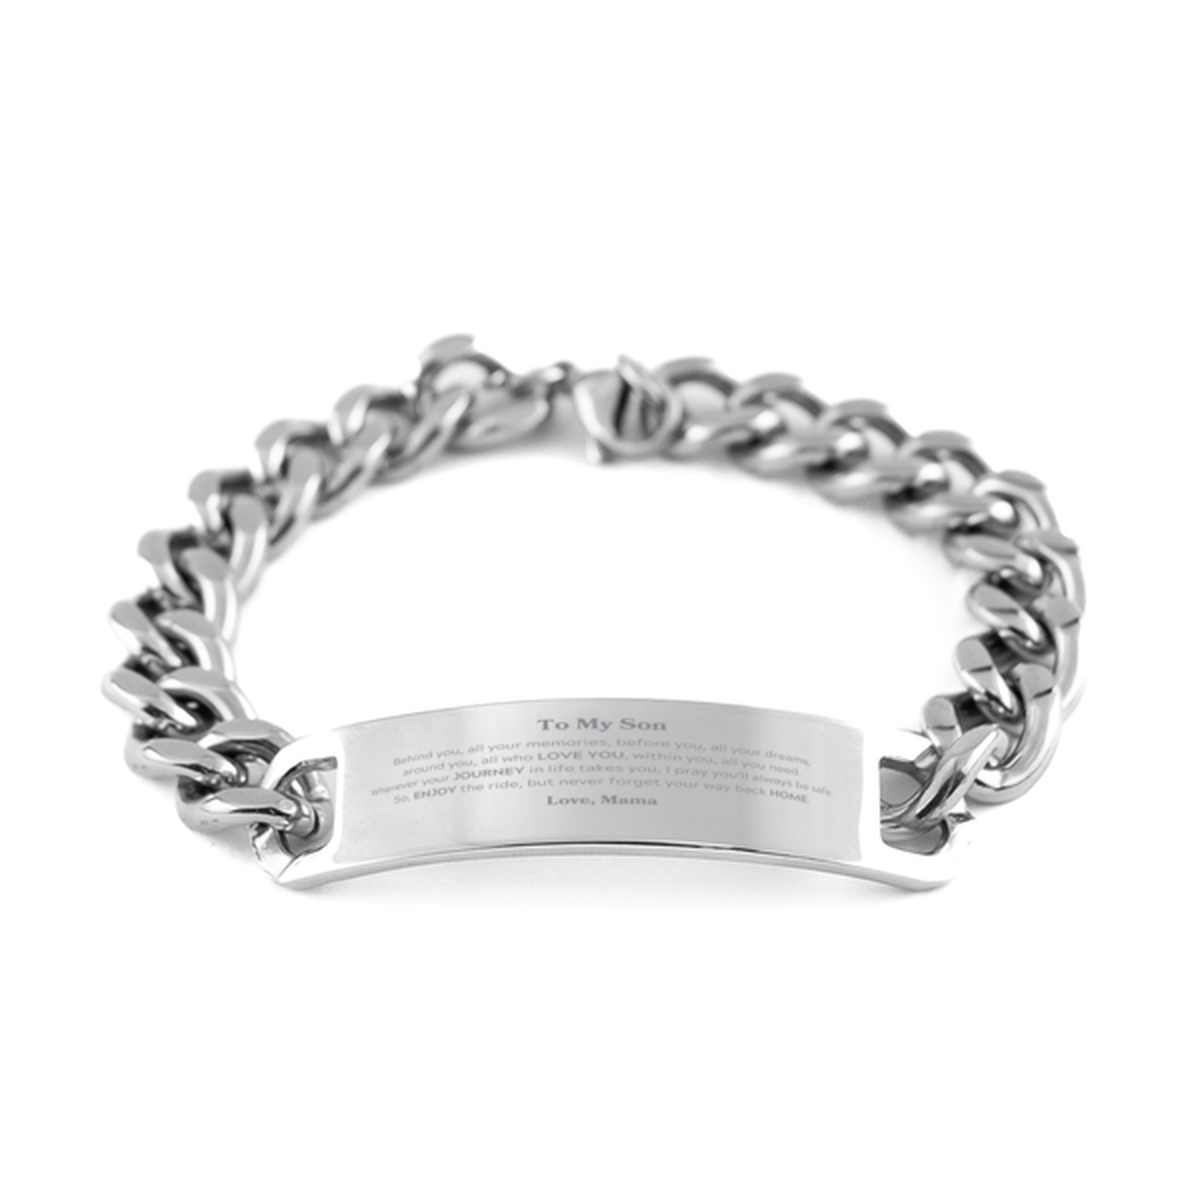 To My Son Graduation Gifts from Mama, Son Cuban Chain Stainless Steel Bracelet Christmas Birthday Gifts for Son Behind you, all your memories, before you, all your dreams. Love, Mama